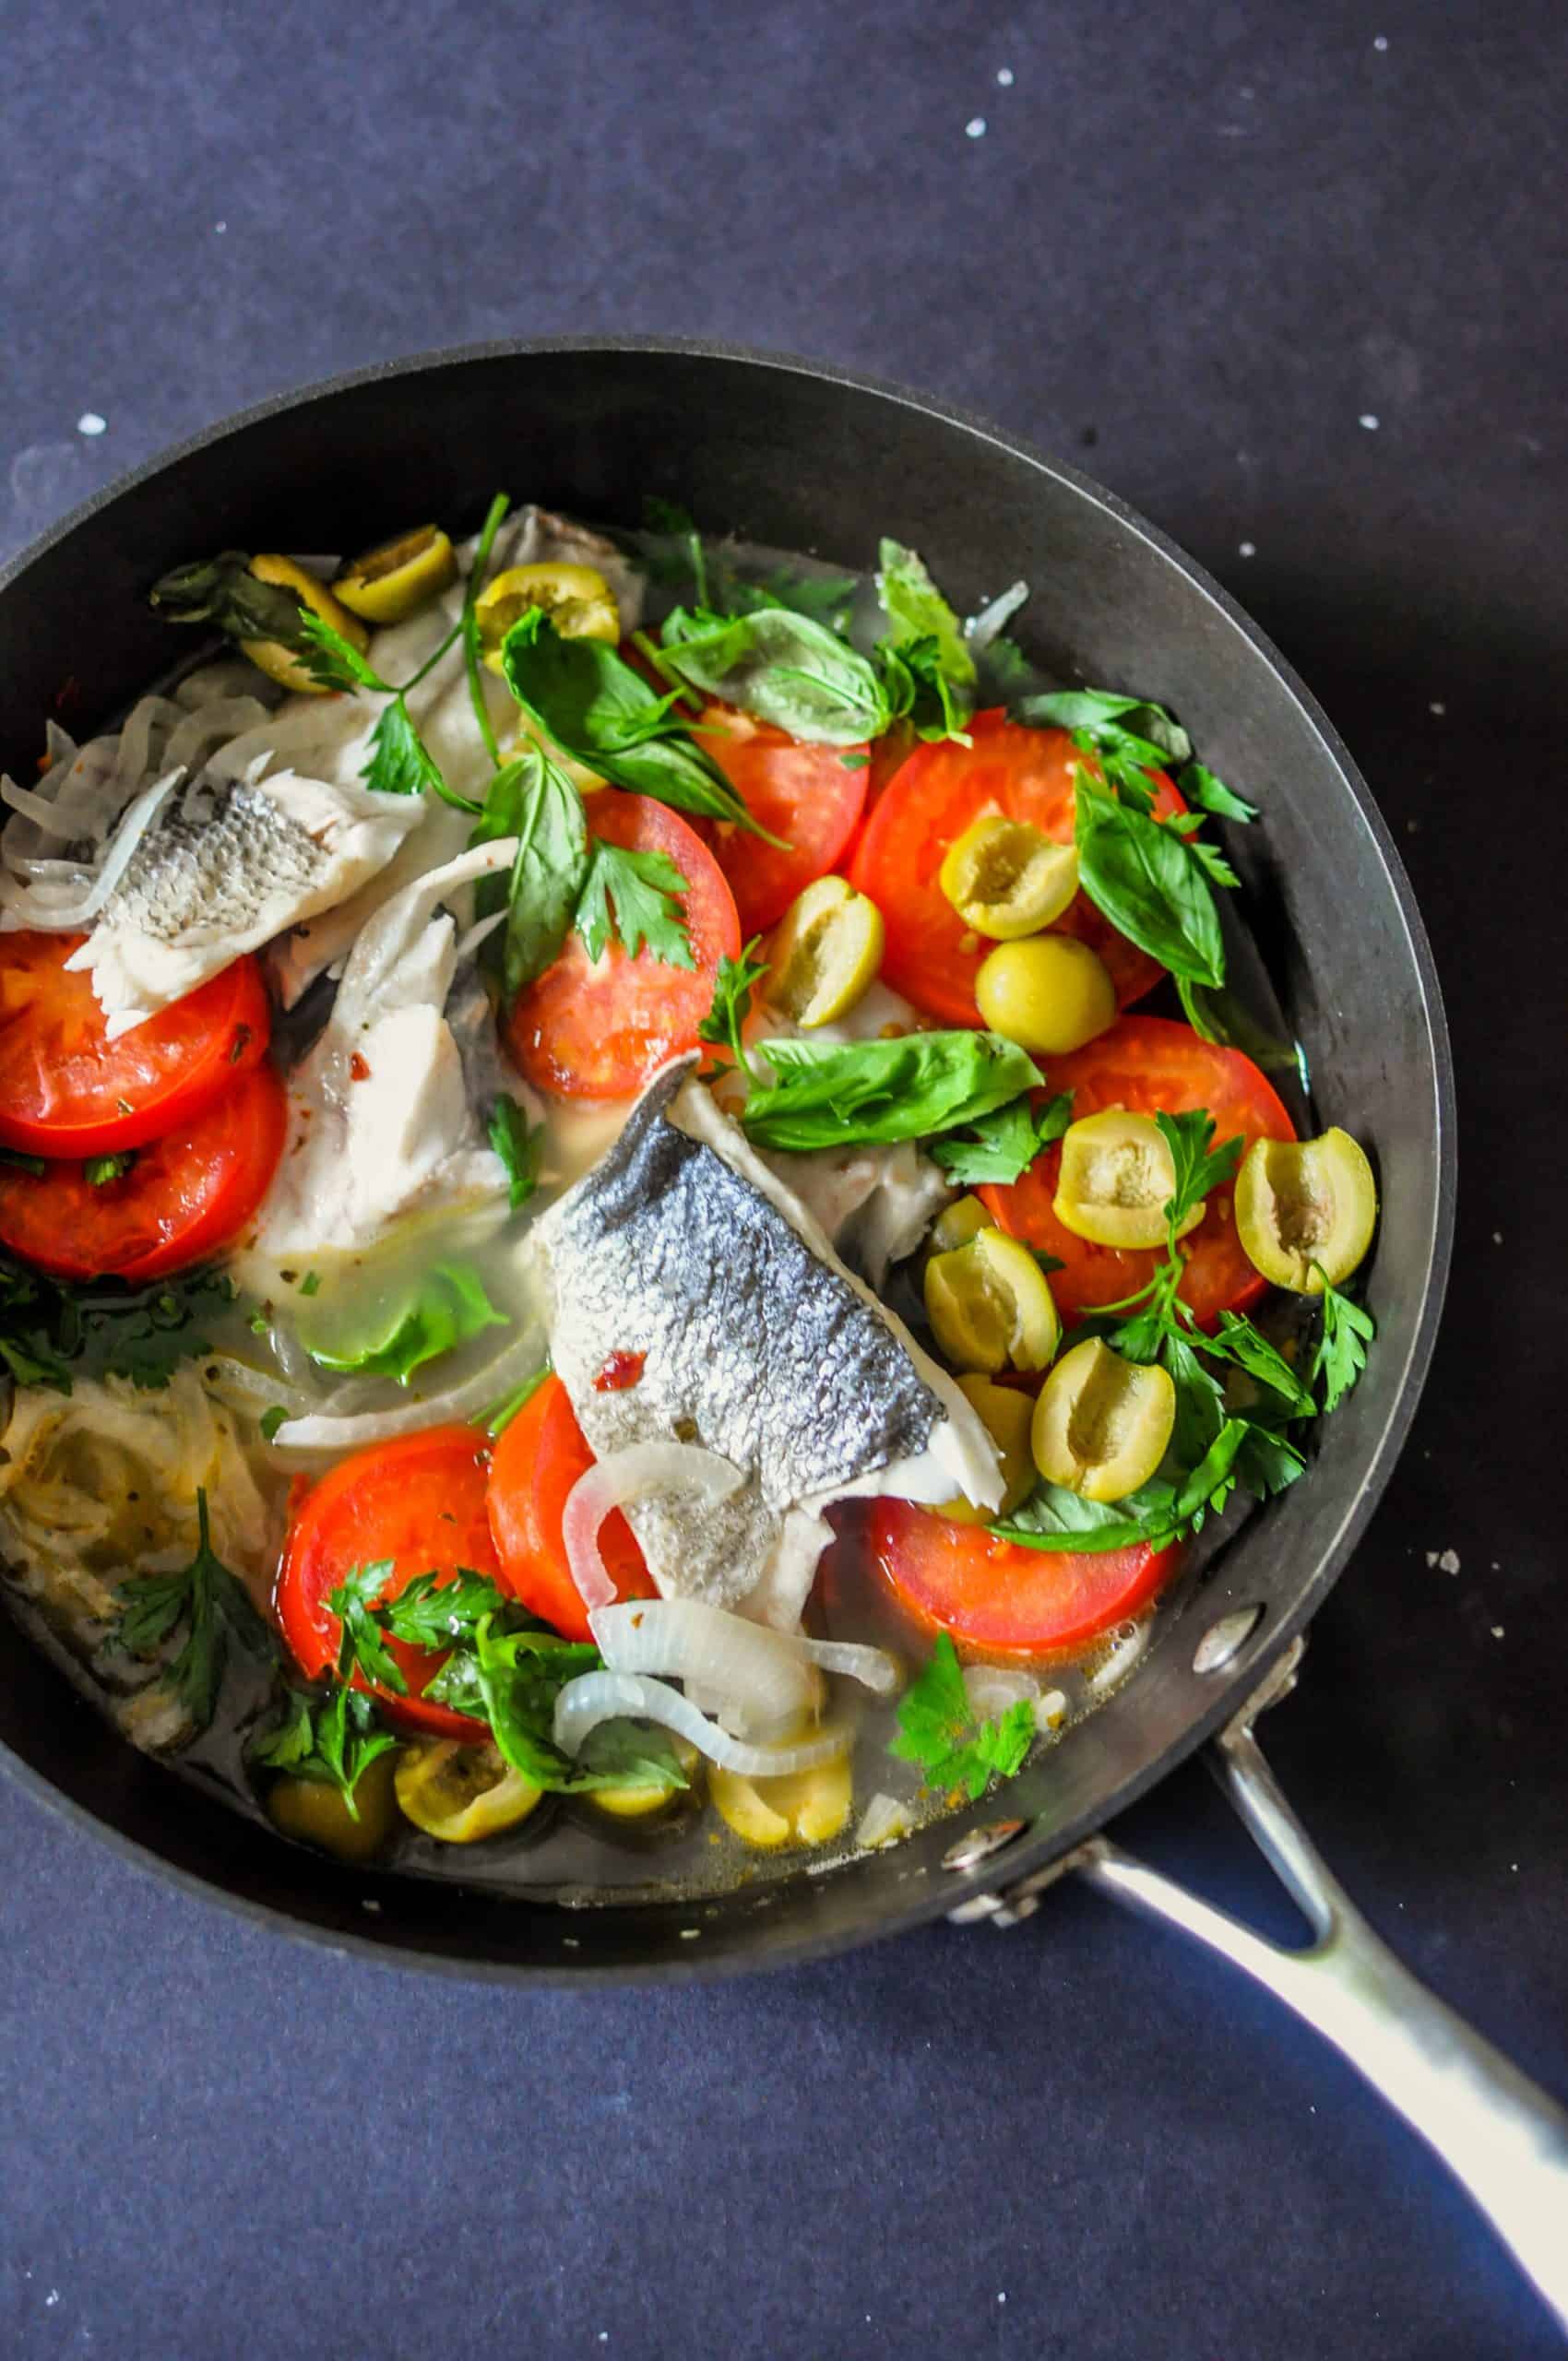 Poached Sea Bass Recipe - this healthy table